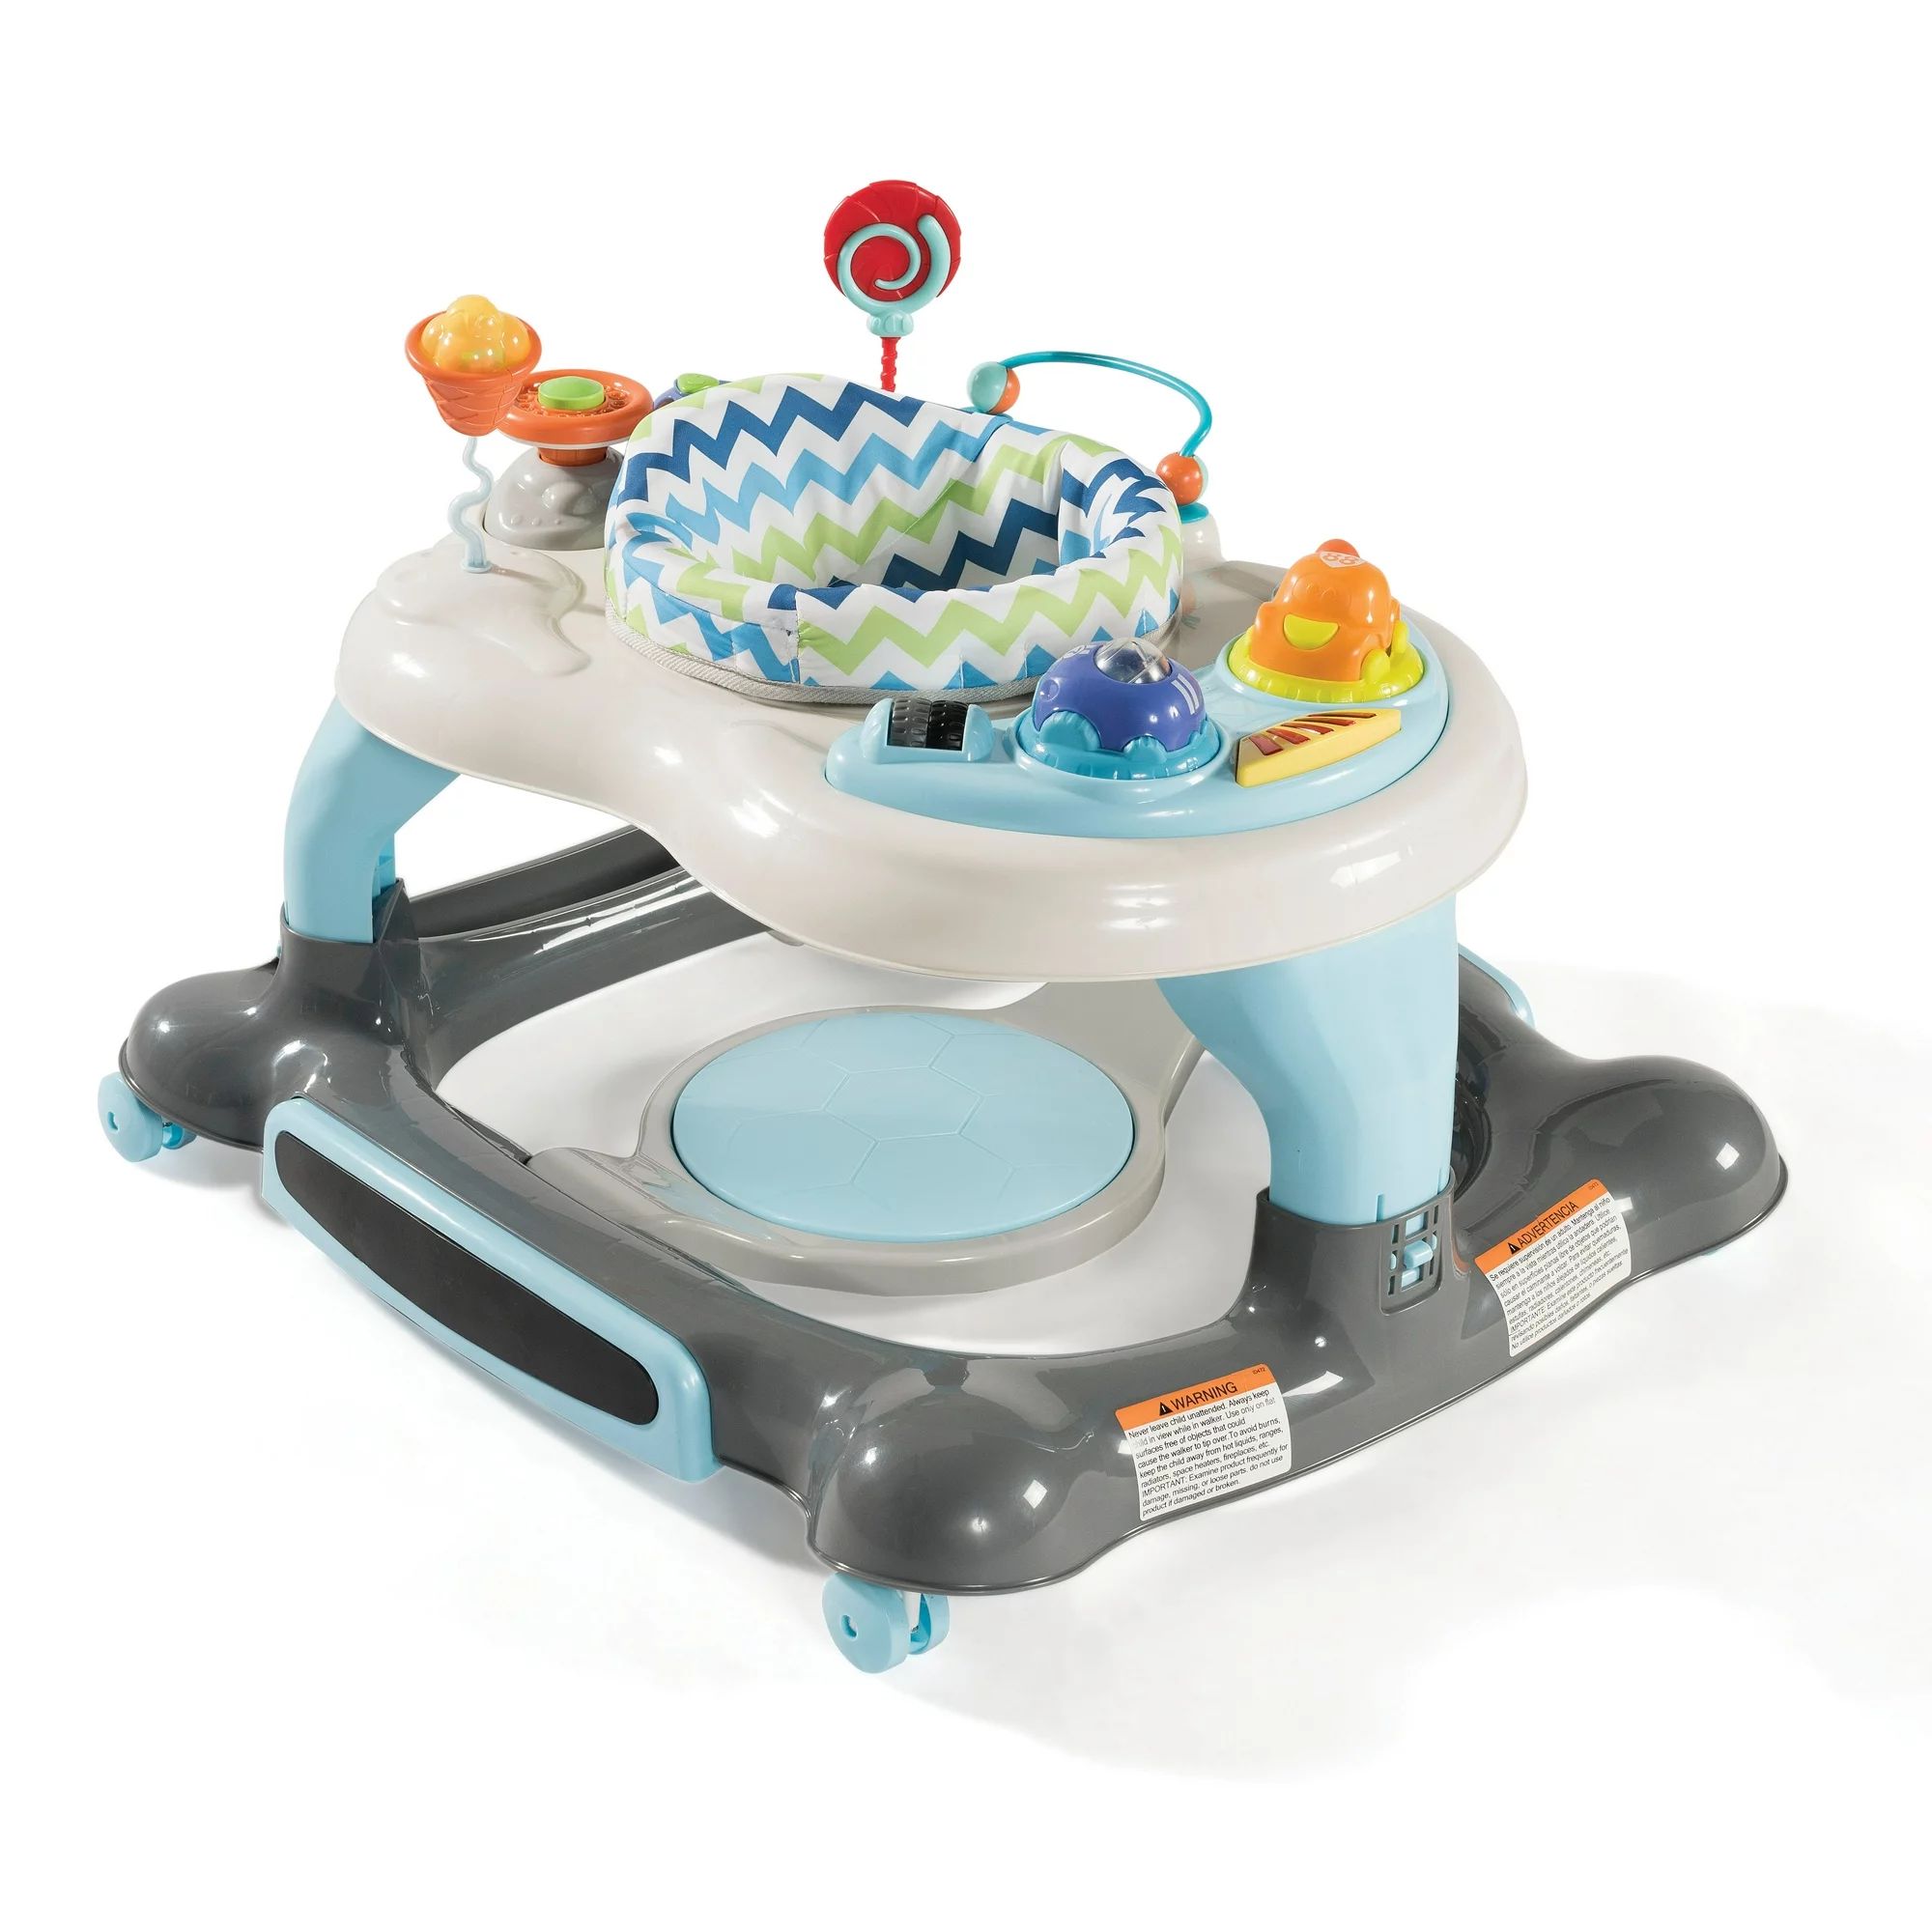 Storkcraft 3-in-1 Activity Center Walker and Rocker with Jumping Board and Feeding Tray Blue/Gray | Walmart (US)